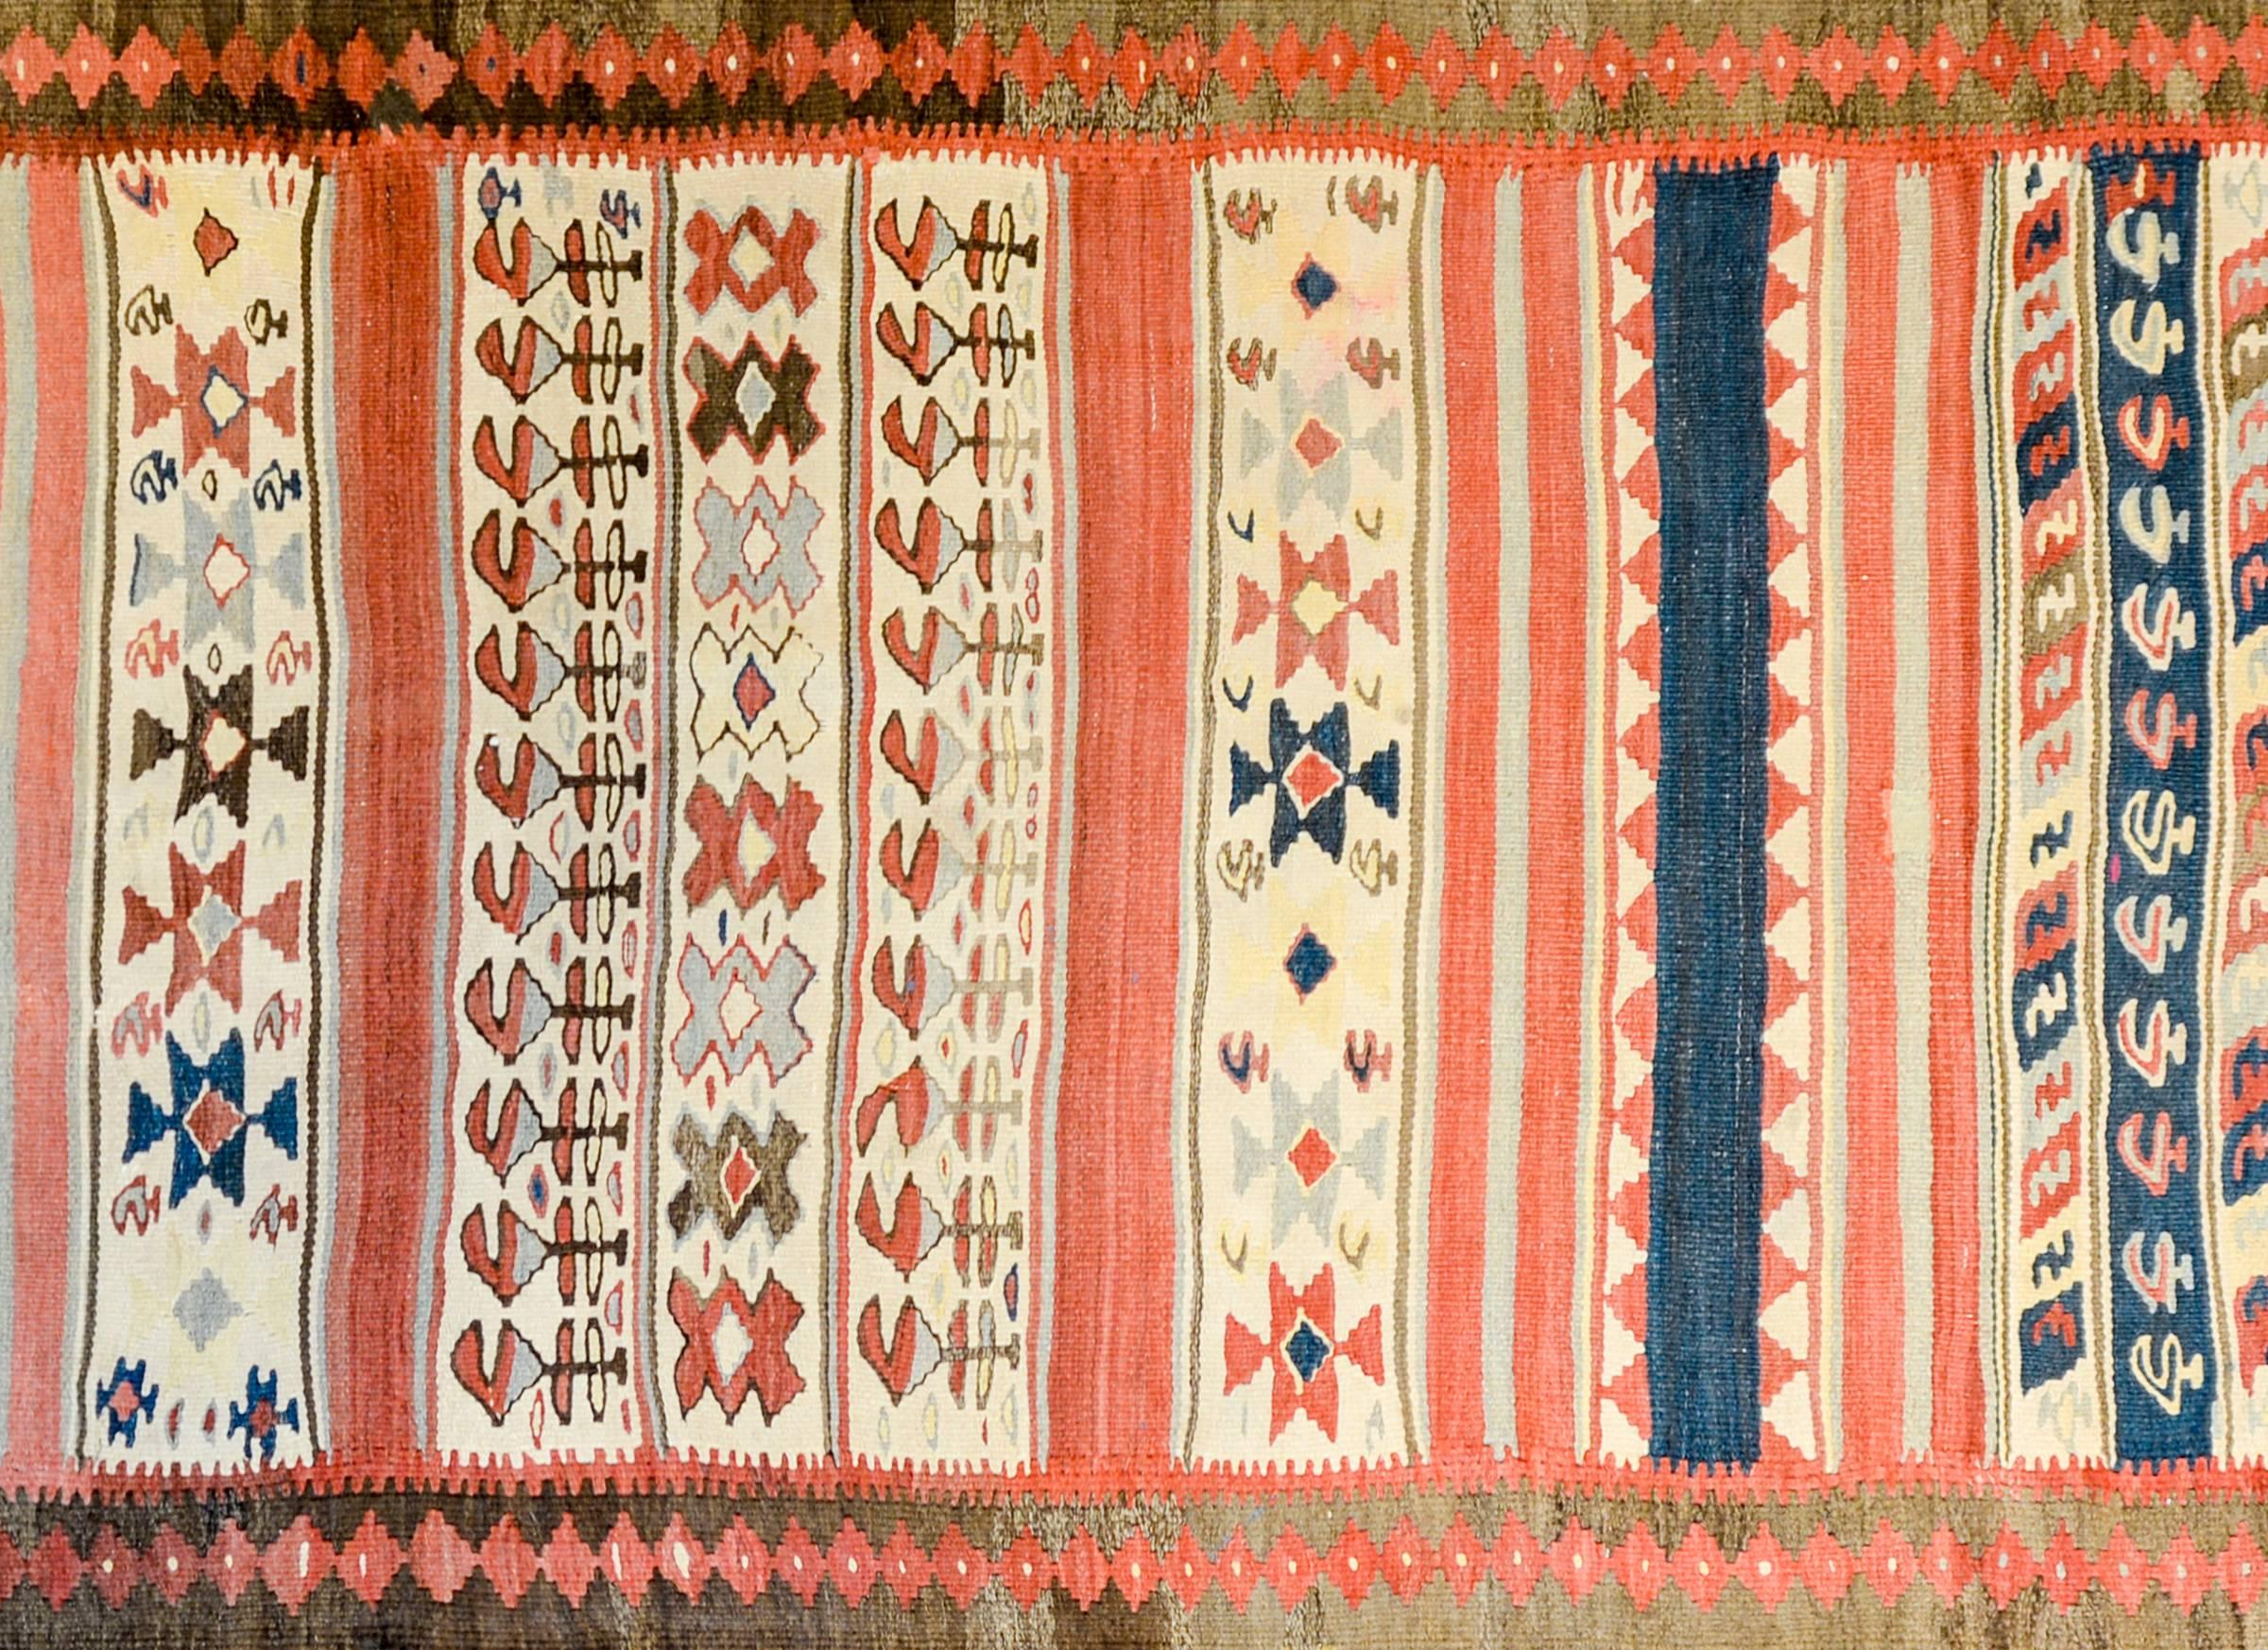 A beautiful early 20th century Persian Zarand Kilim runner with a fantastic pattern of alternating boldly multicolored stripes and stripes with stylized flowers, woven in crimson, indigo, green, brown, and natural colored wool. The borer is